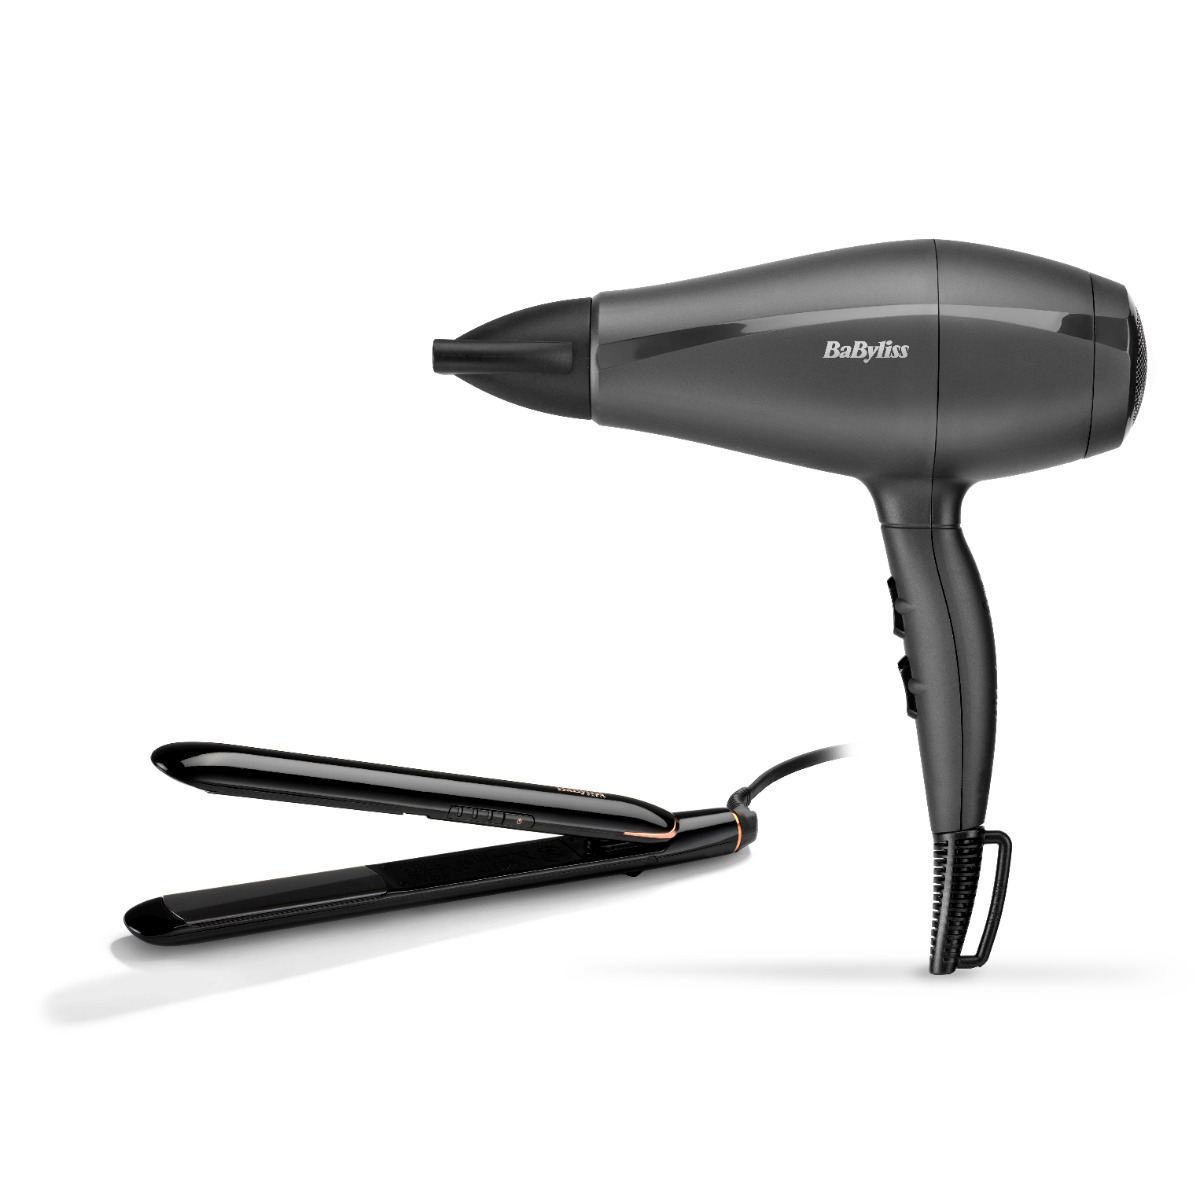 Babyliss Hair Dryer, 2000W, 3 Temperatures, Black - 5910E with Babyliss Smooth Finish 230 Hair Straightener, Black - ST250E